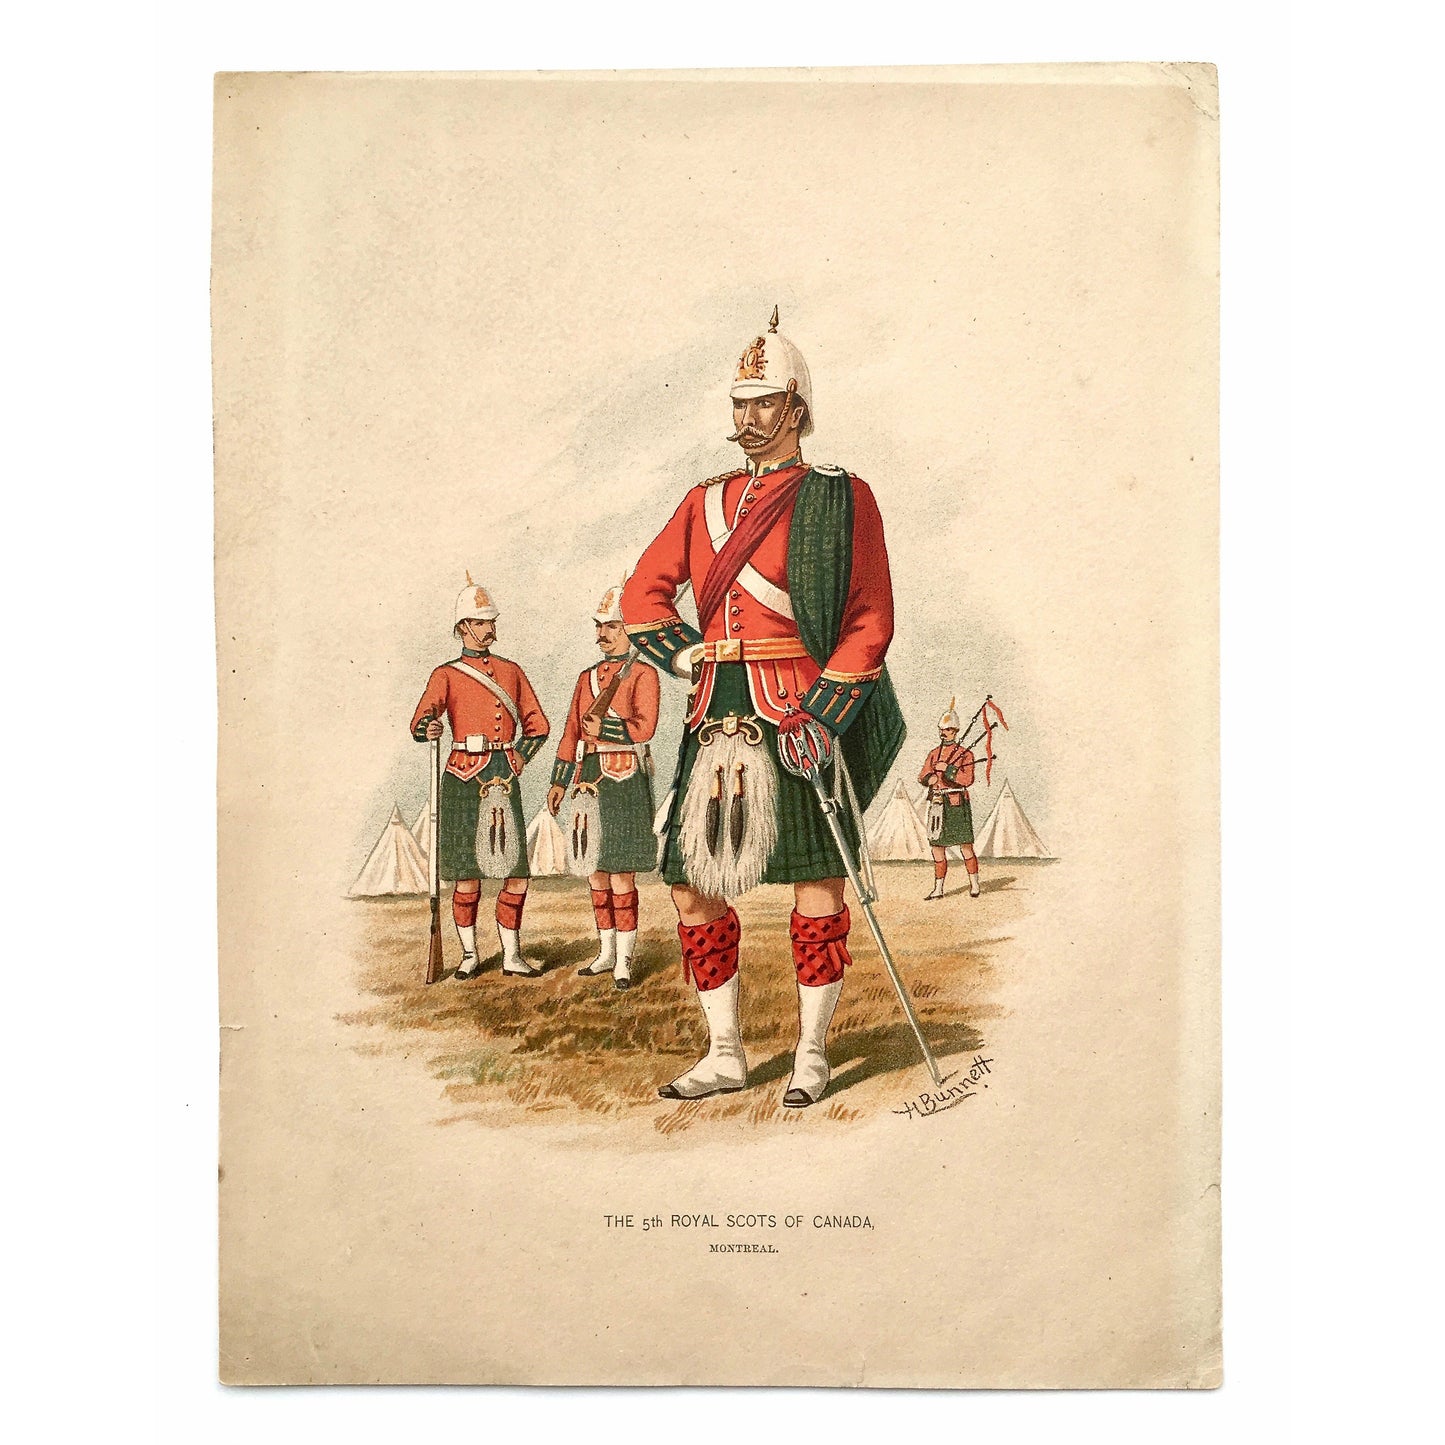 The 5th Royal Scots of Canada, Scots, Royal Scots, Scottish, Scotland, Kilts, bagpipes, Montreal, Canada, Artillery, Military, Military Costume, Horses, Riding, Costume, Uniform, Her Majesty's Army, Regiments, Queen's Forces, H. Bunnett, Bunnett, Sword, Army, London, 1890, Military Prints, Canadian, Canadian Military, Canadian Army, Armed Forces, Military Uniform, Chromolithograph, J. S. Virtue & Co., Antique Prints, Antique, Prints, Printmaking, Military History, Art History, Art, Decor, Home Decor, Design